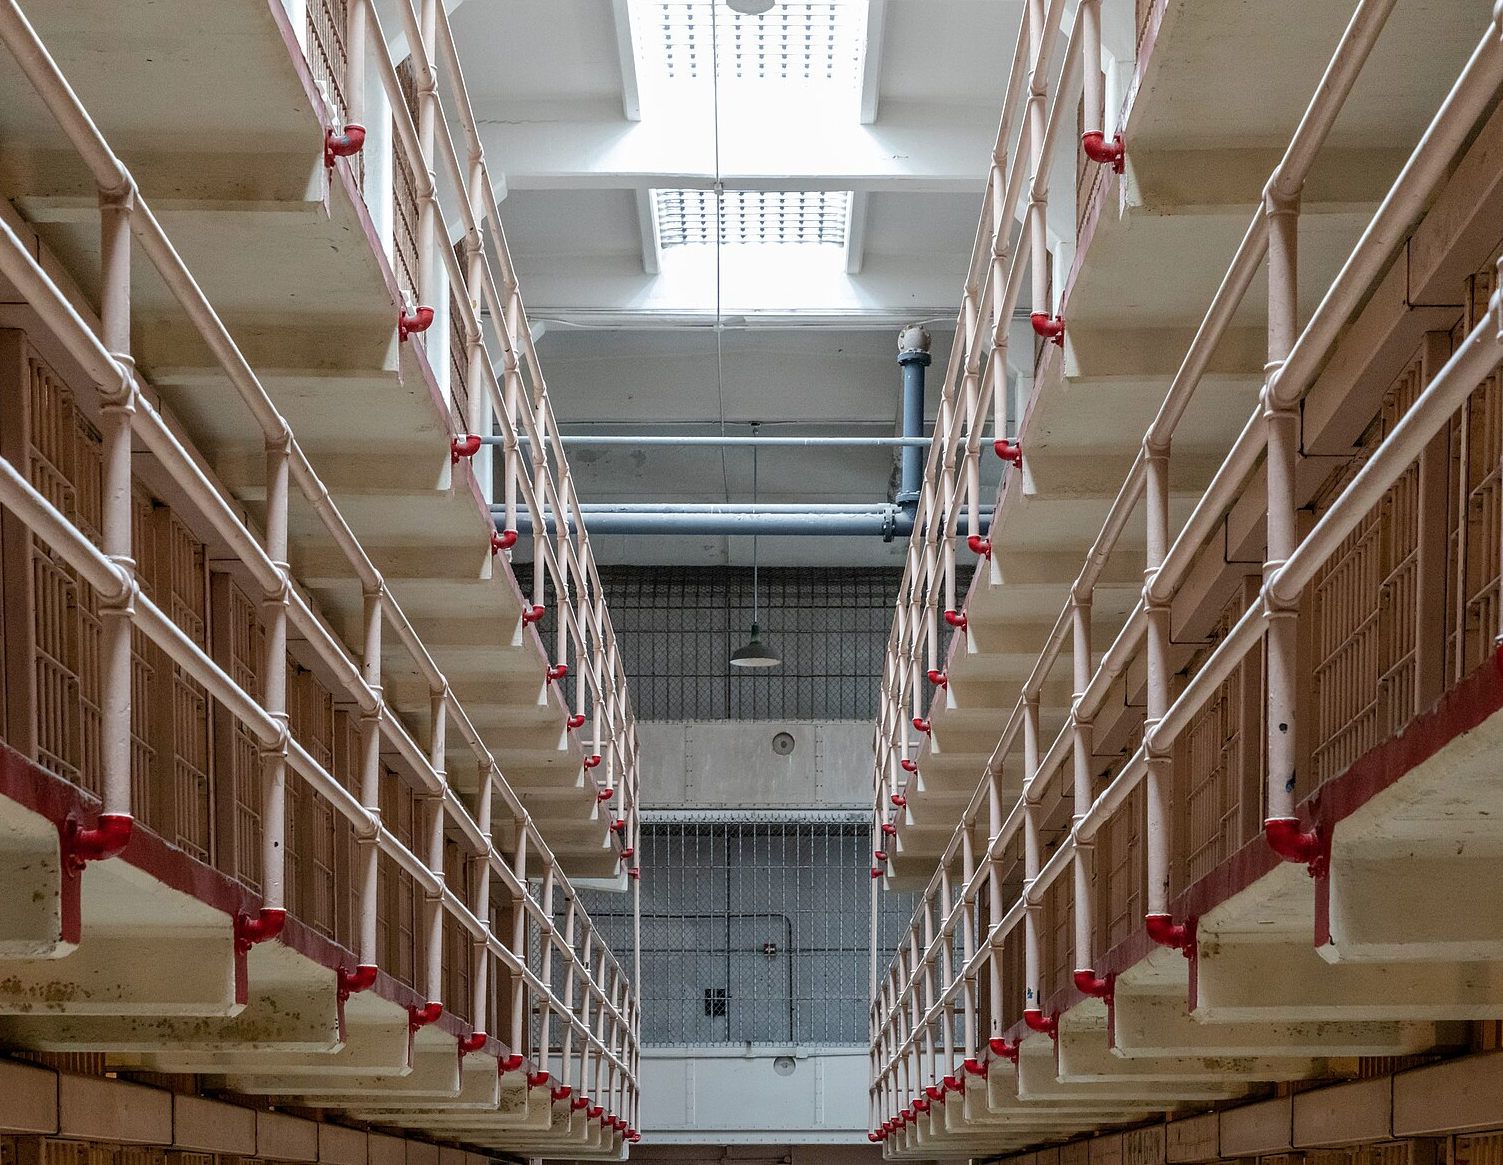 Do we incarcerate too many or too few?